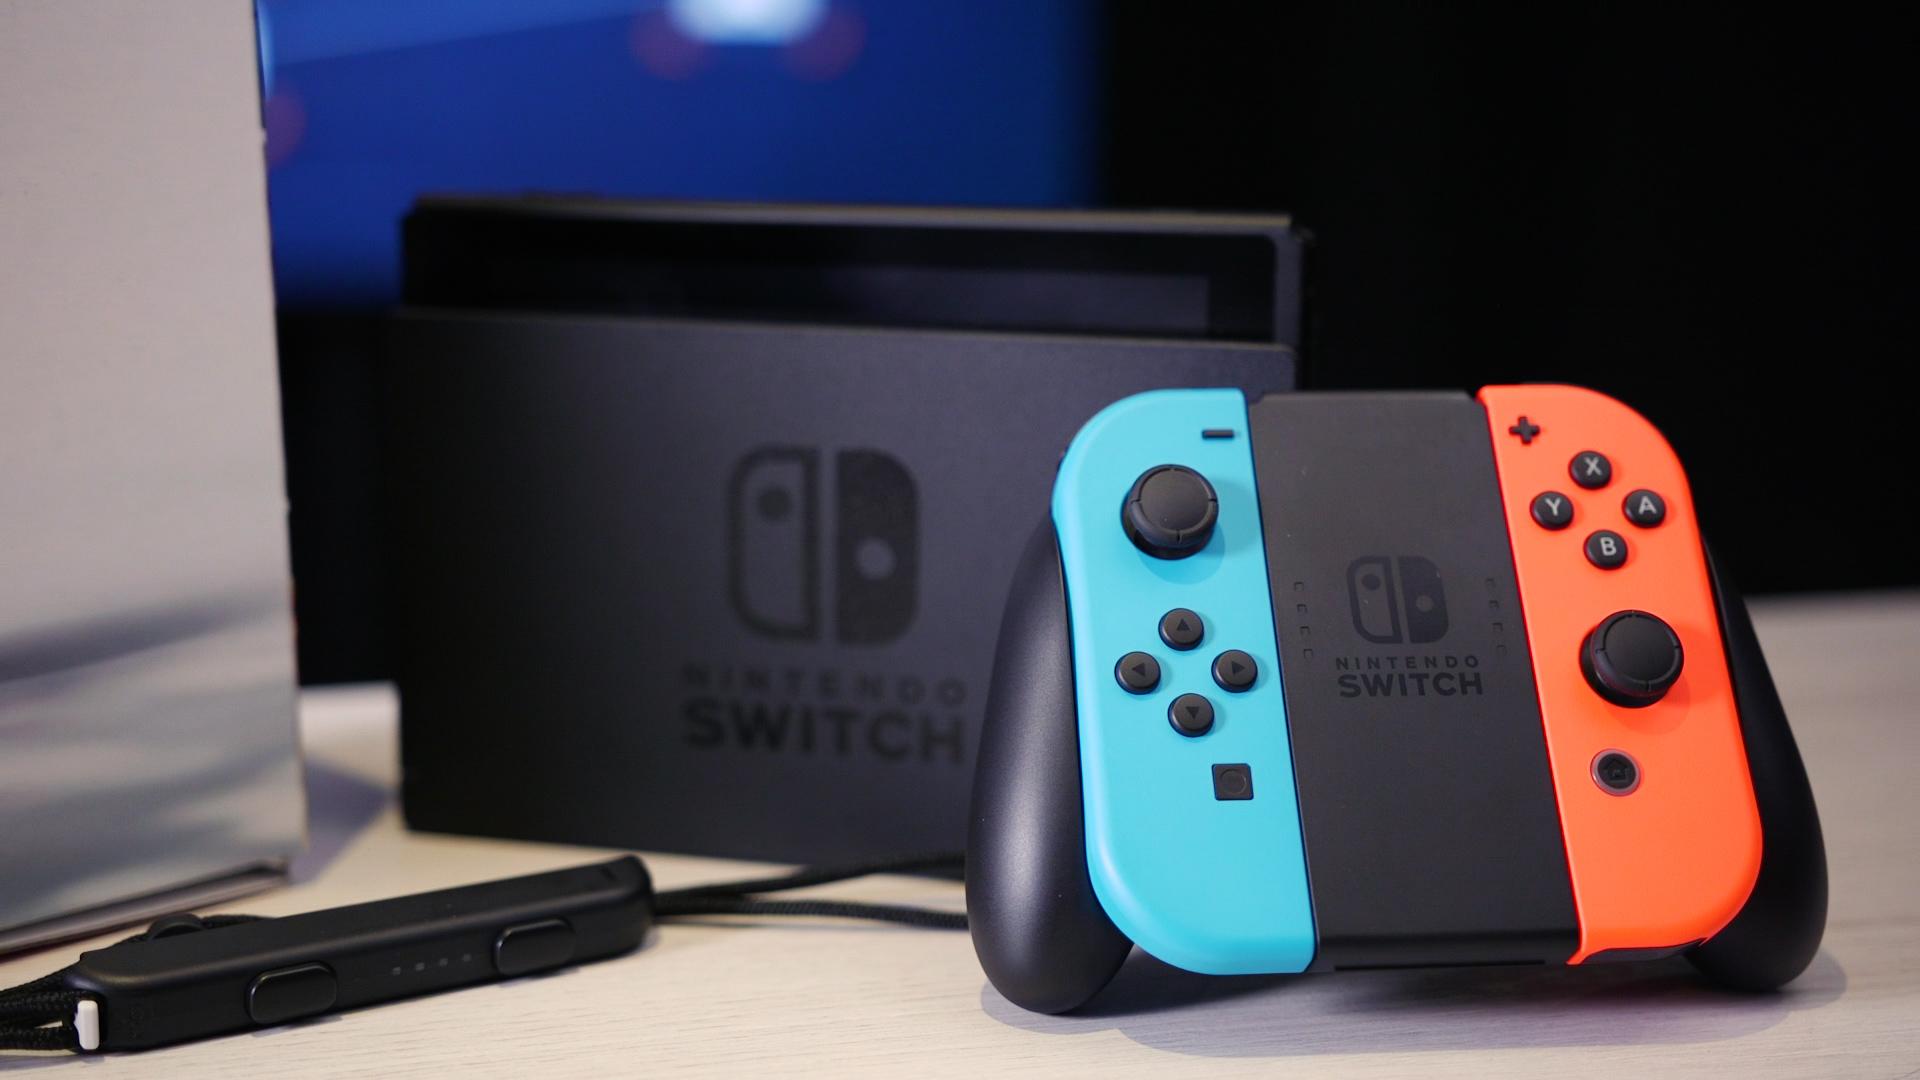 Nintendo Switch Lifetime Sales Have Outsold PS4 in Japan